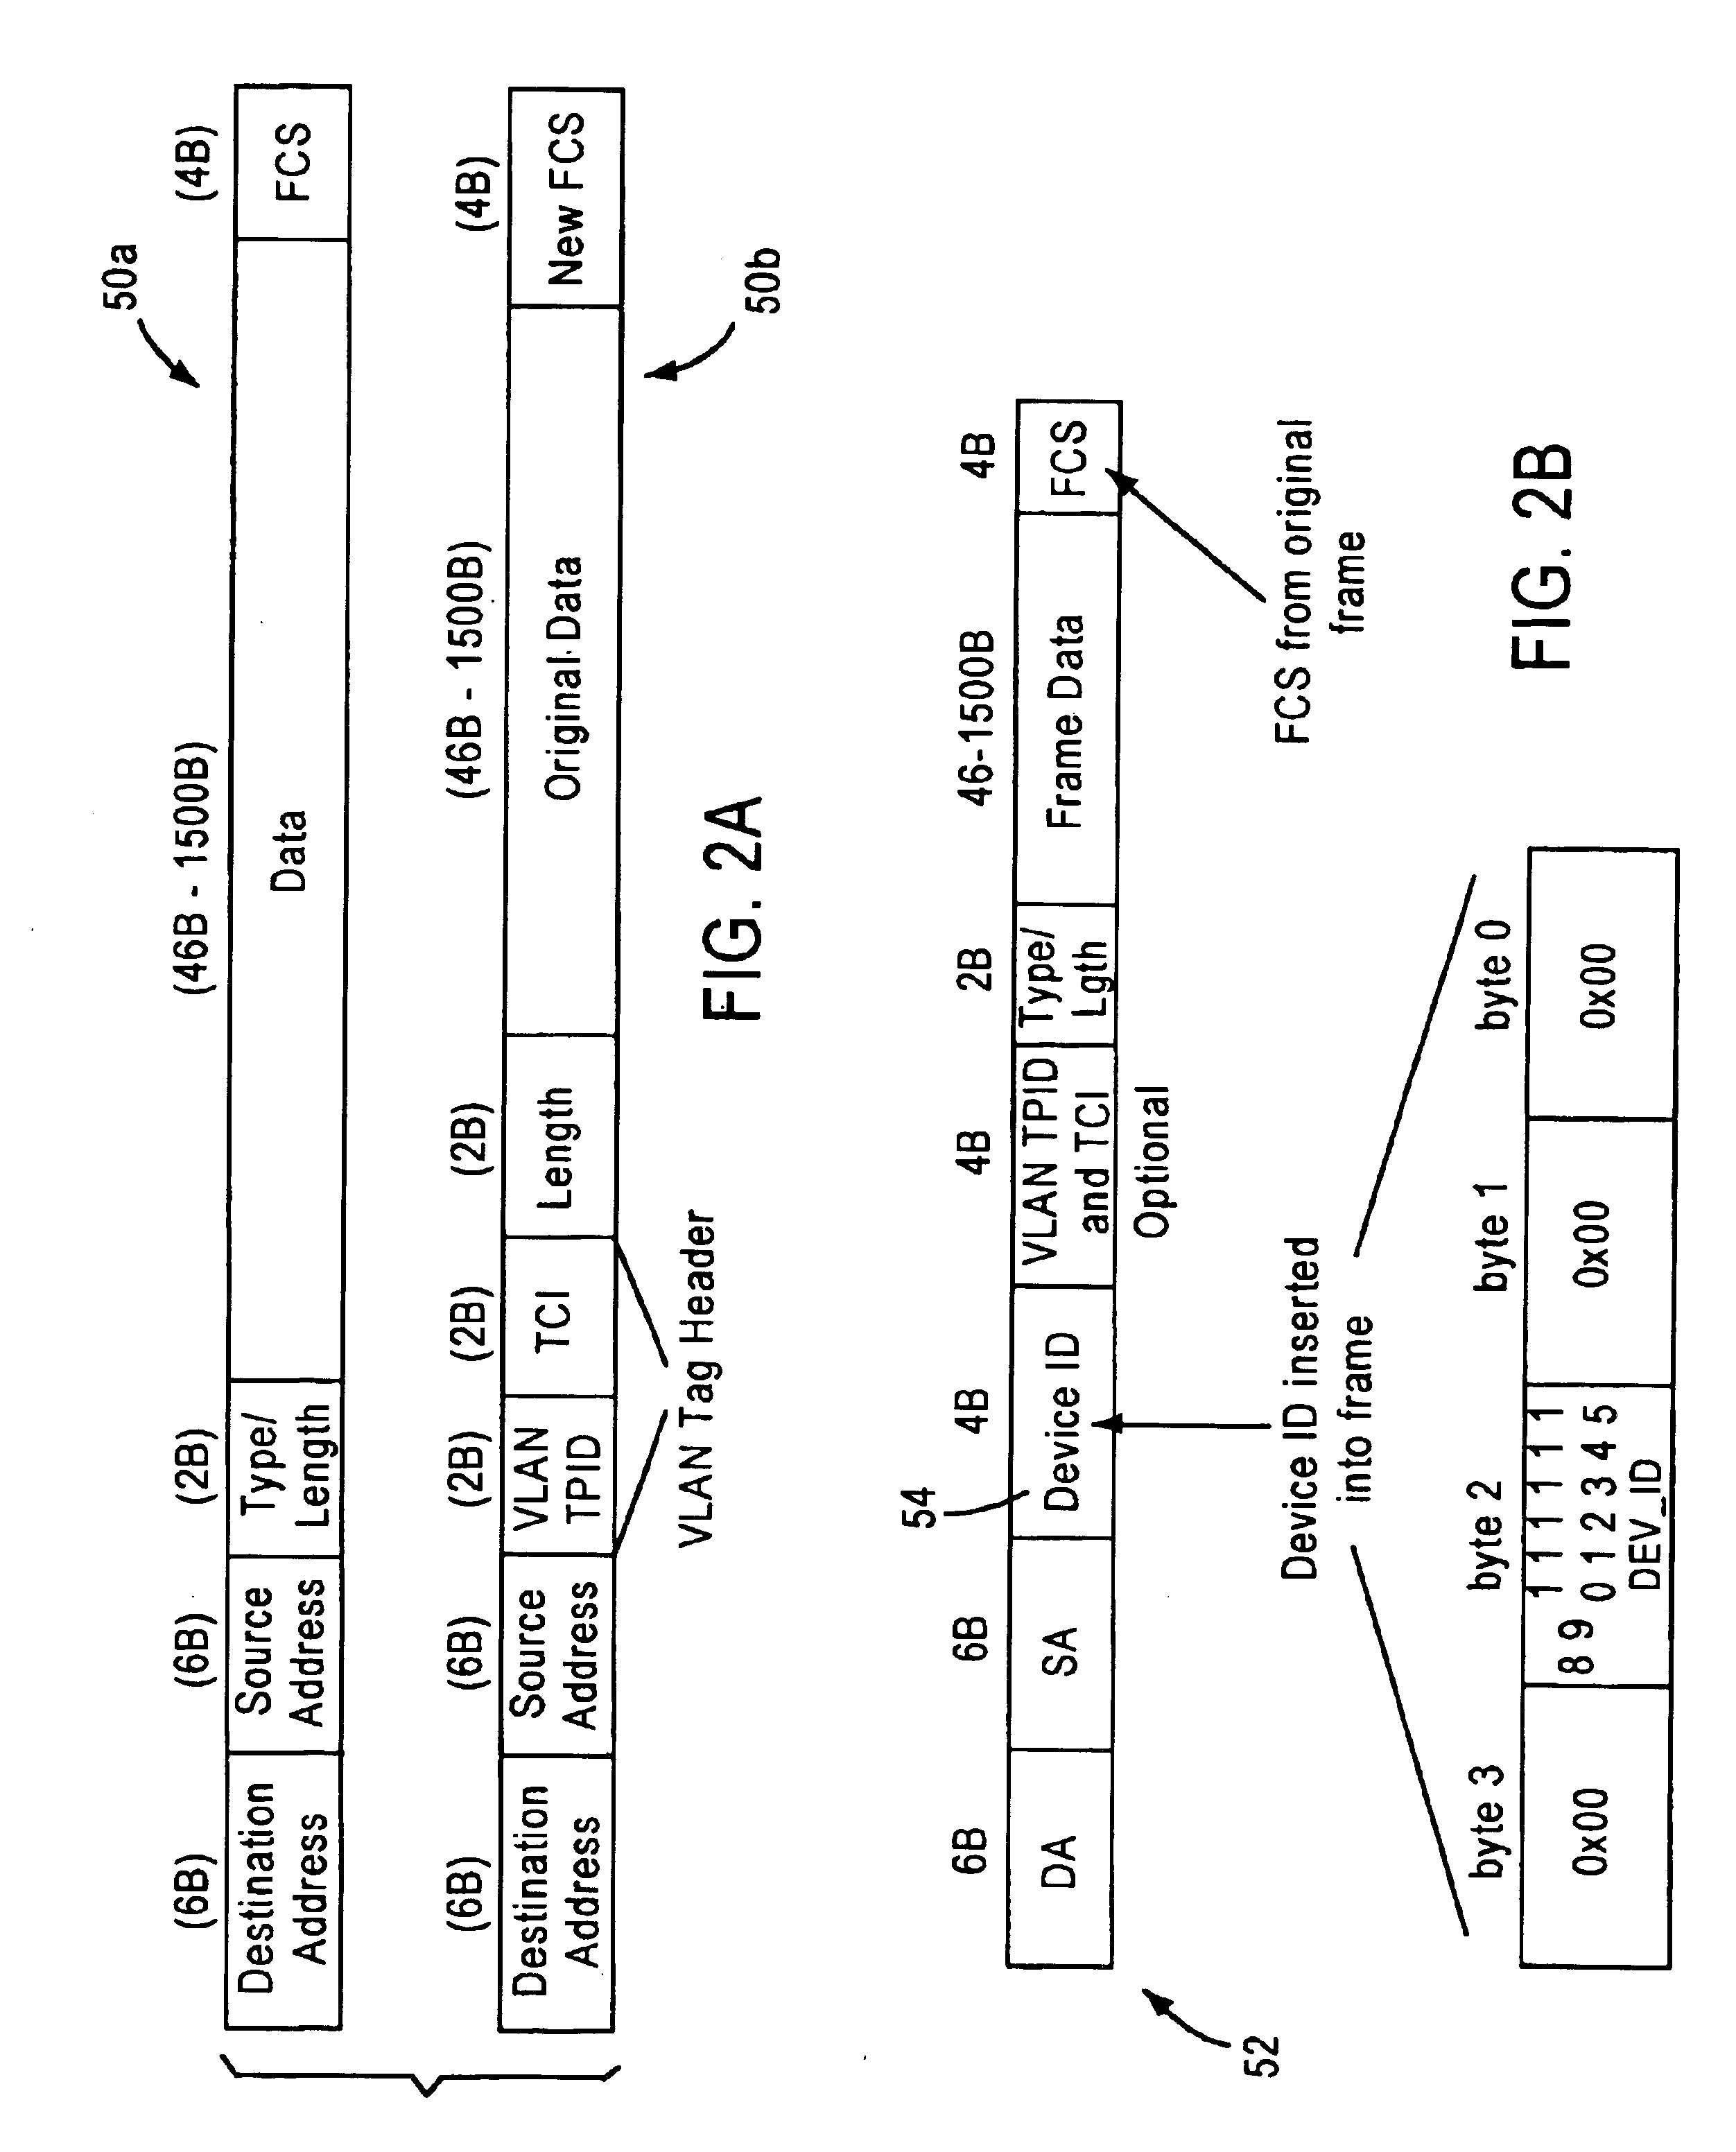 Arrangement for testing network switch expansion port data by converting to media independent interface format